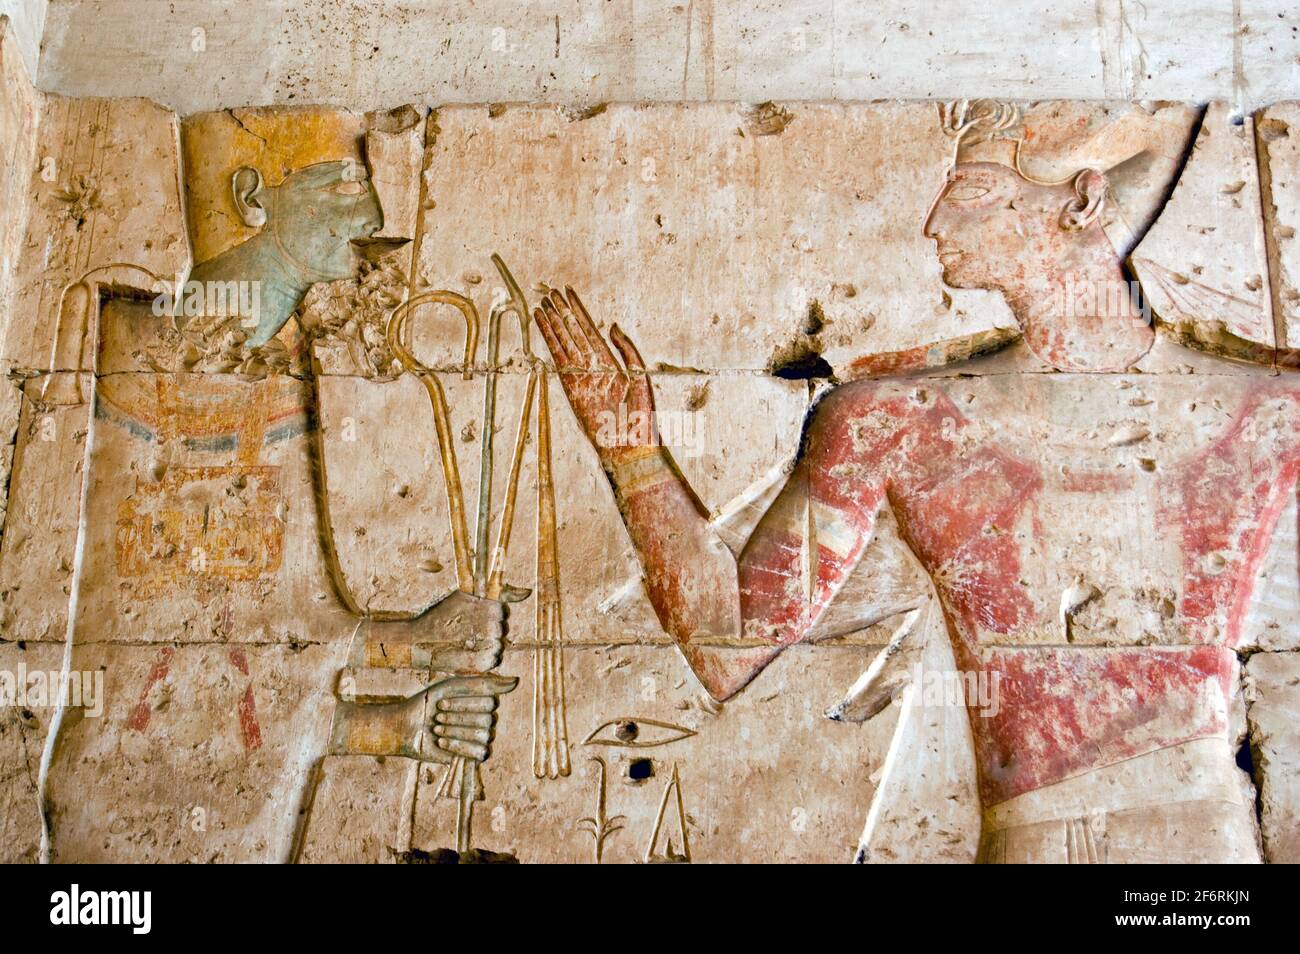 An Ancient Egyptian decorated hieroglyphic carving of the god Ptah with the Pharoah Seti. Temple to Osiris at Abydos, Egypt. Stock Photo